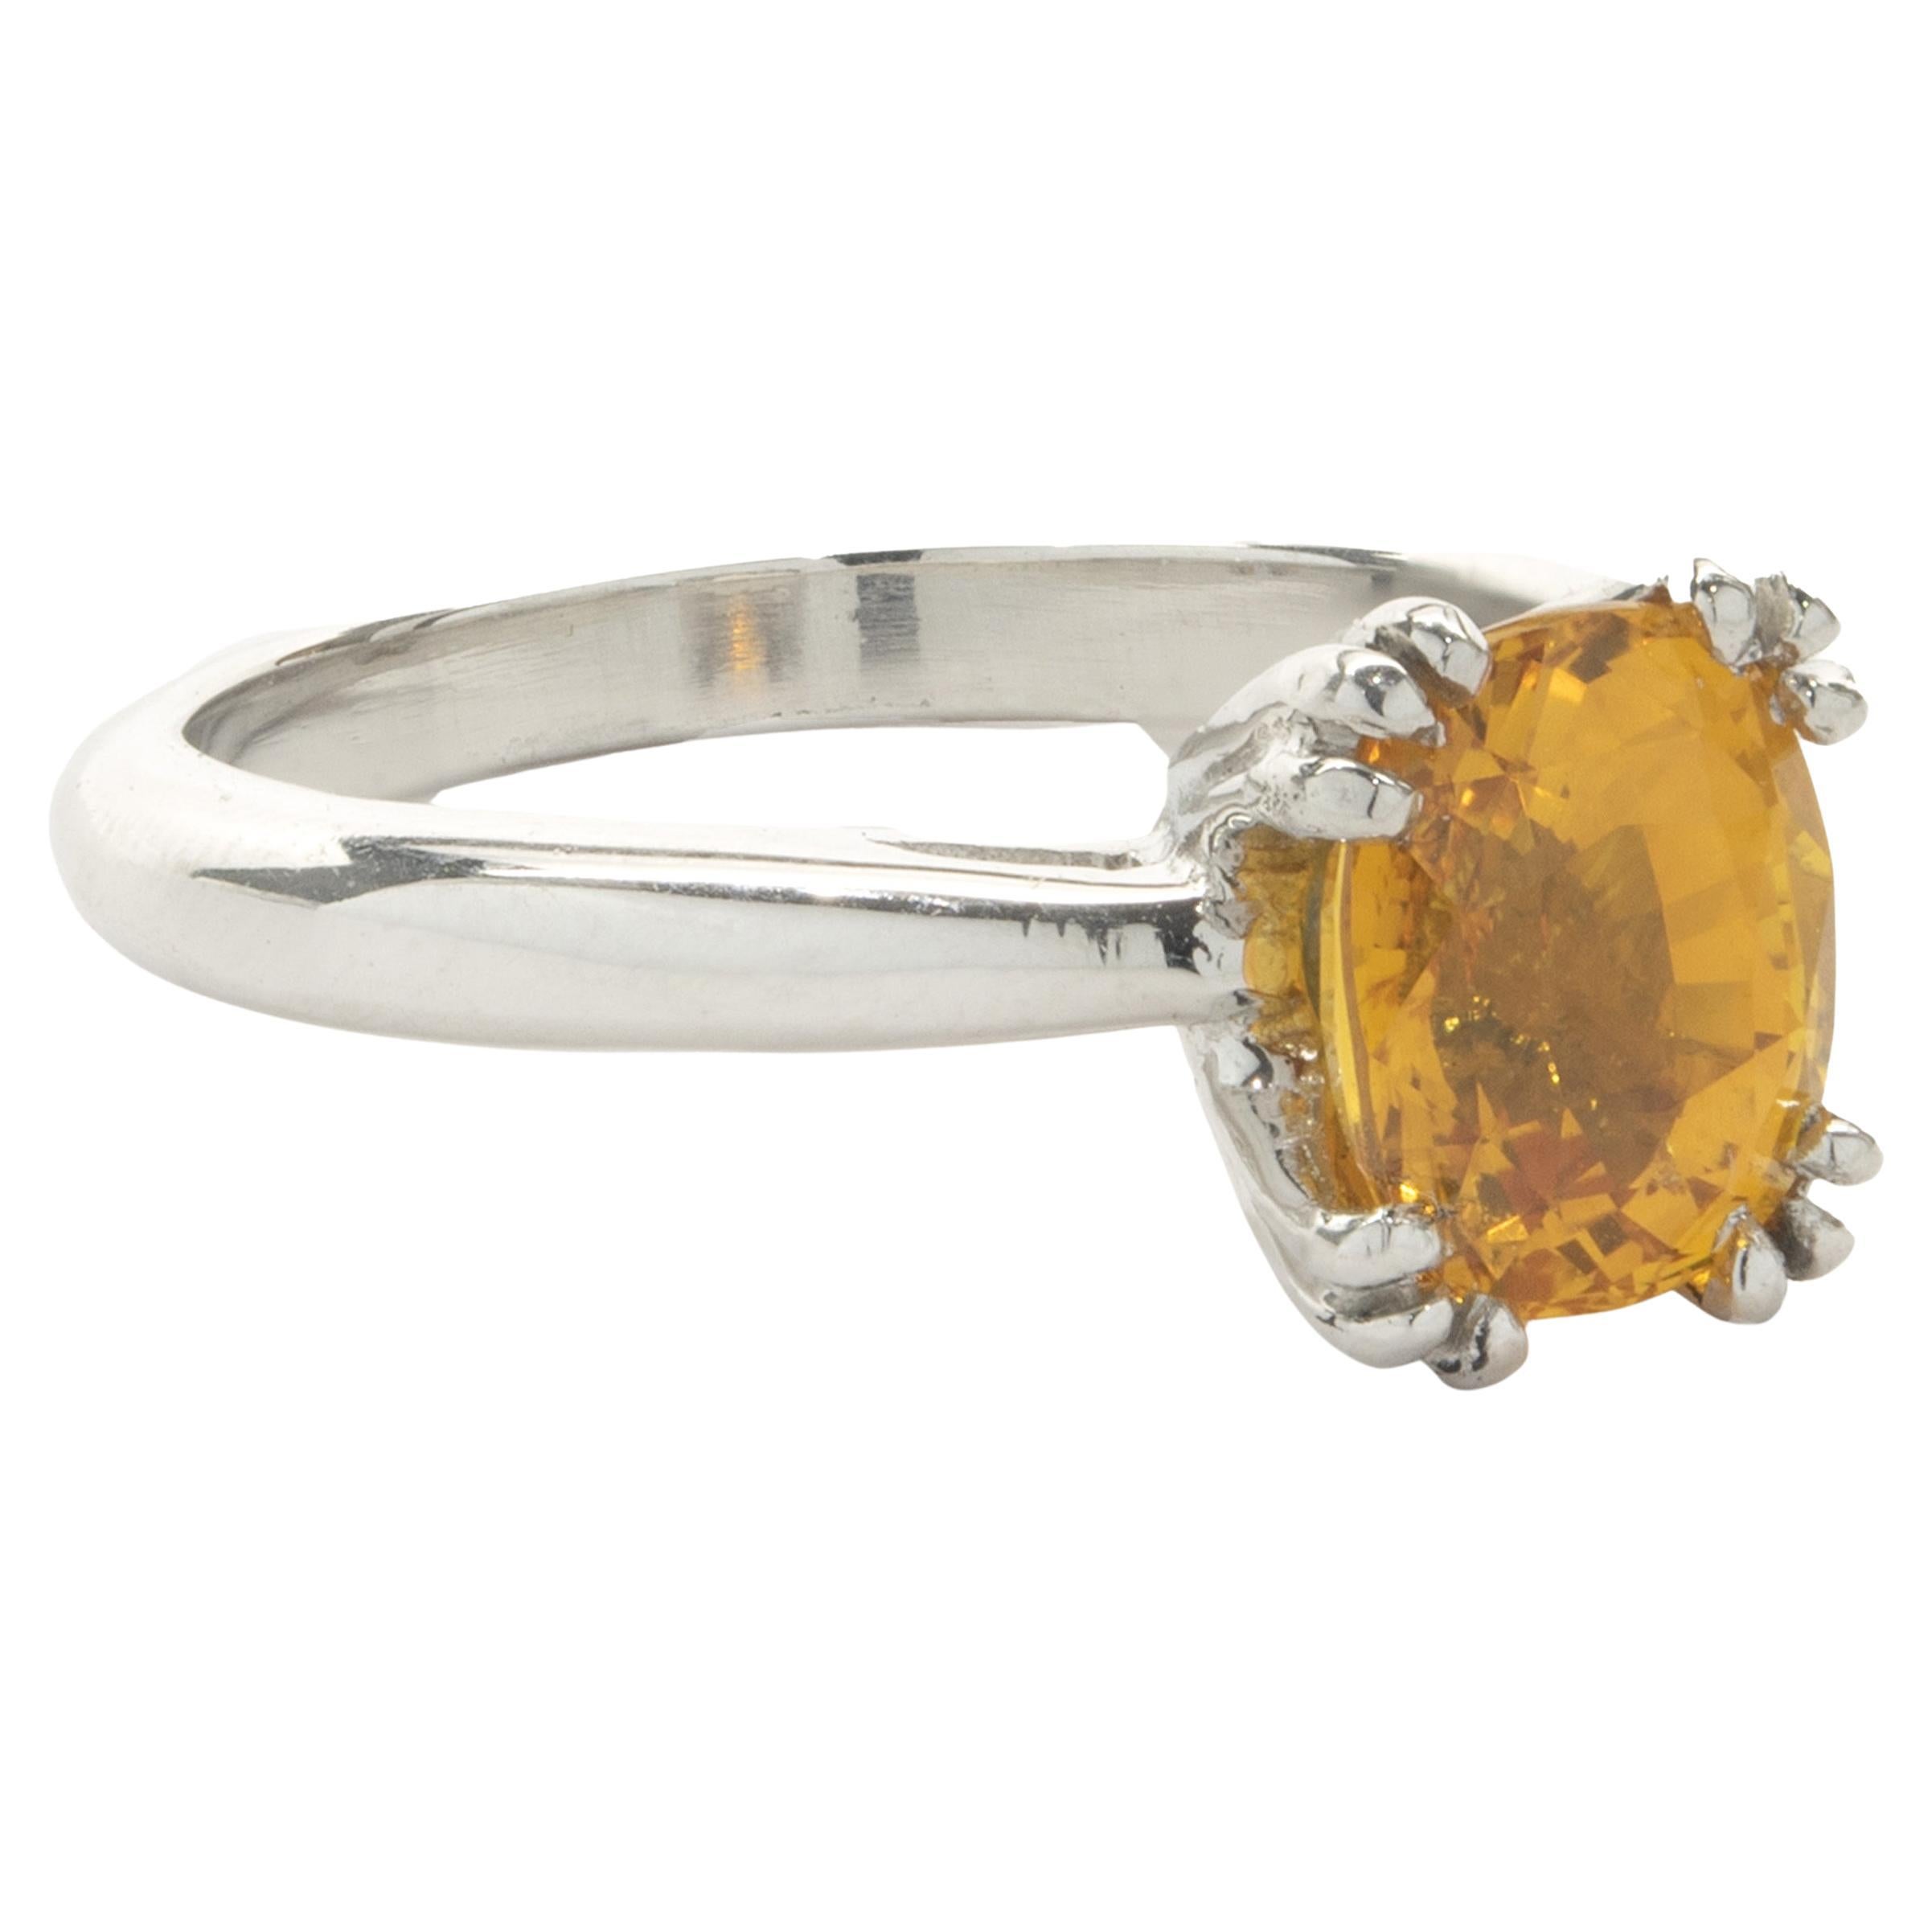 Designer: custom
Material: Platinum
Yellow Sapphire: 1 cushion cut = 2.51ct
Clarity: AAA+
Dimensions: ring top measures 9.25mm wide
Ring Size: 6.75 (complimentary sizing available)
Weight: 7.88 grams